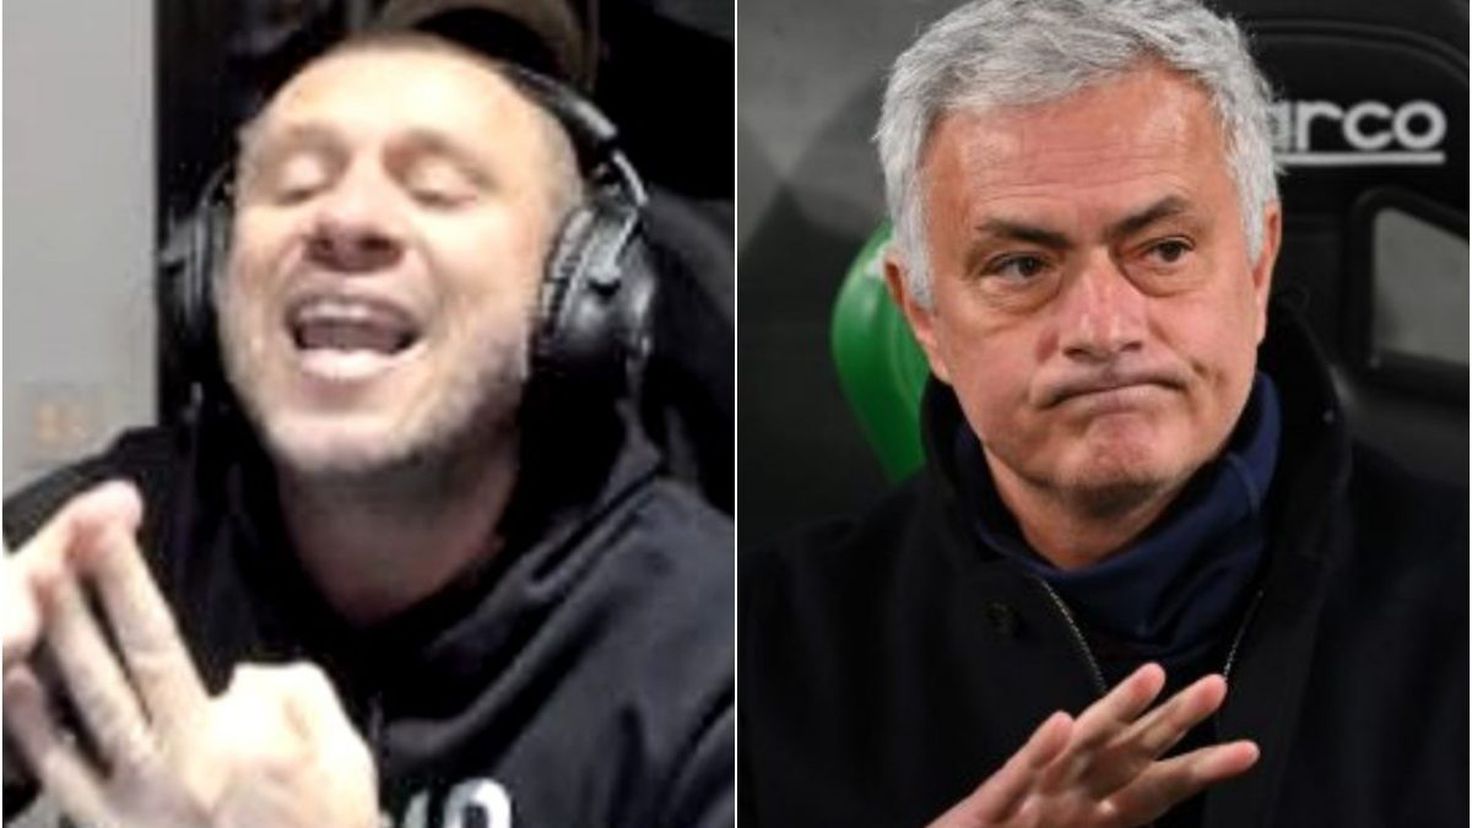 Cassano charges against Mou again: "They did shit"
